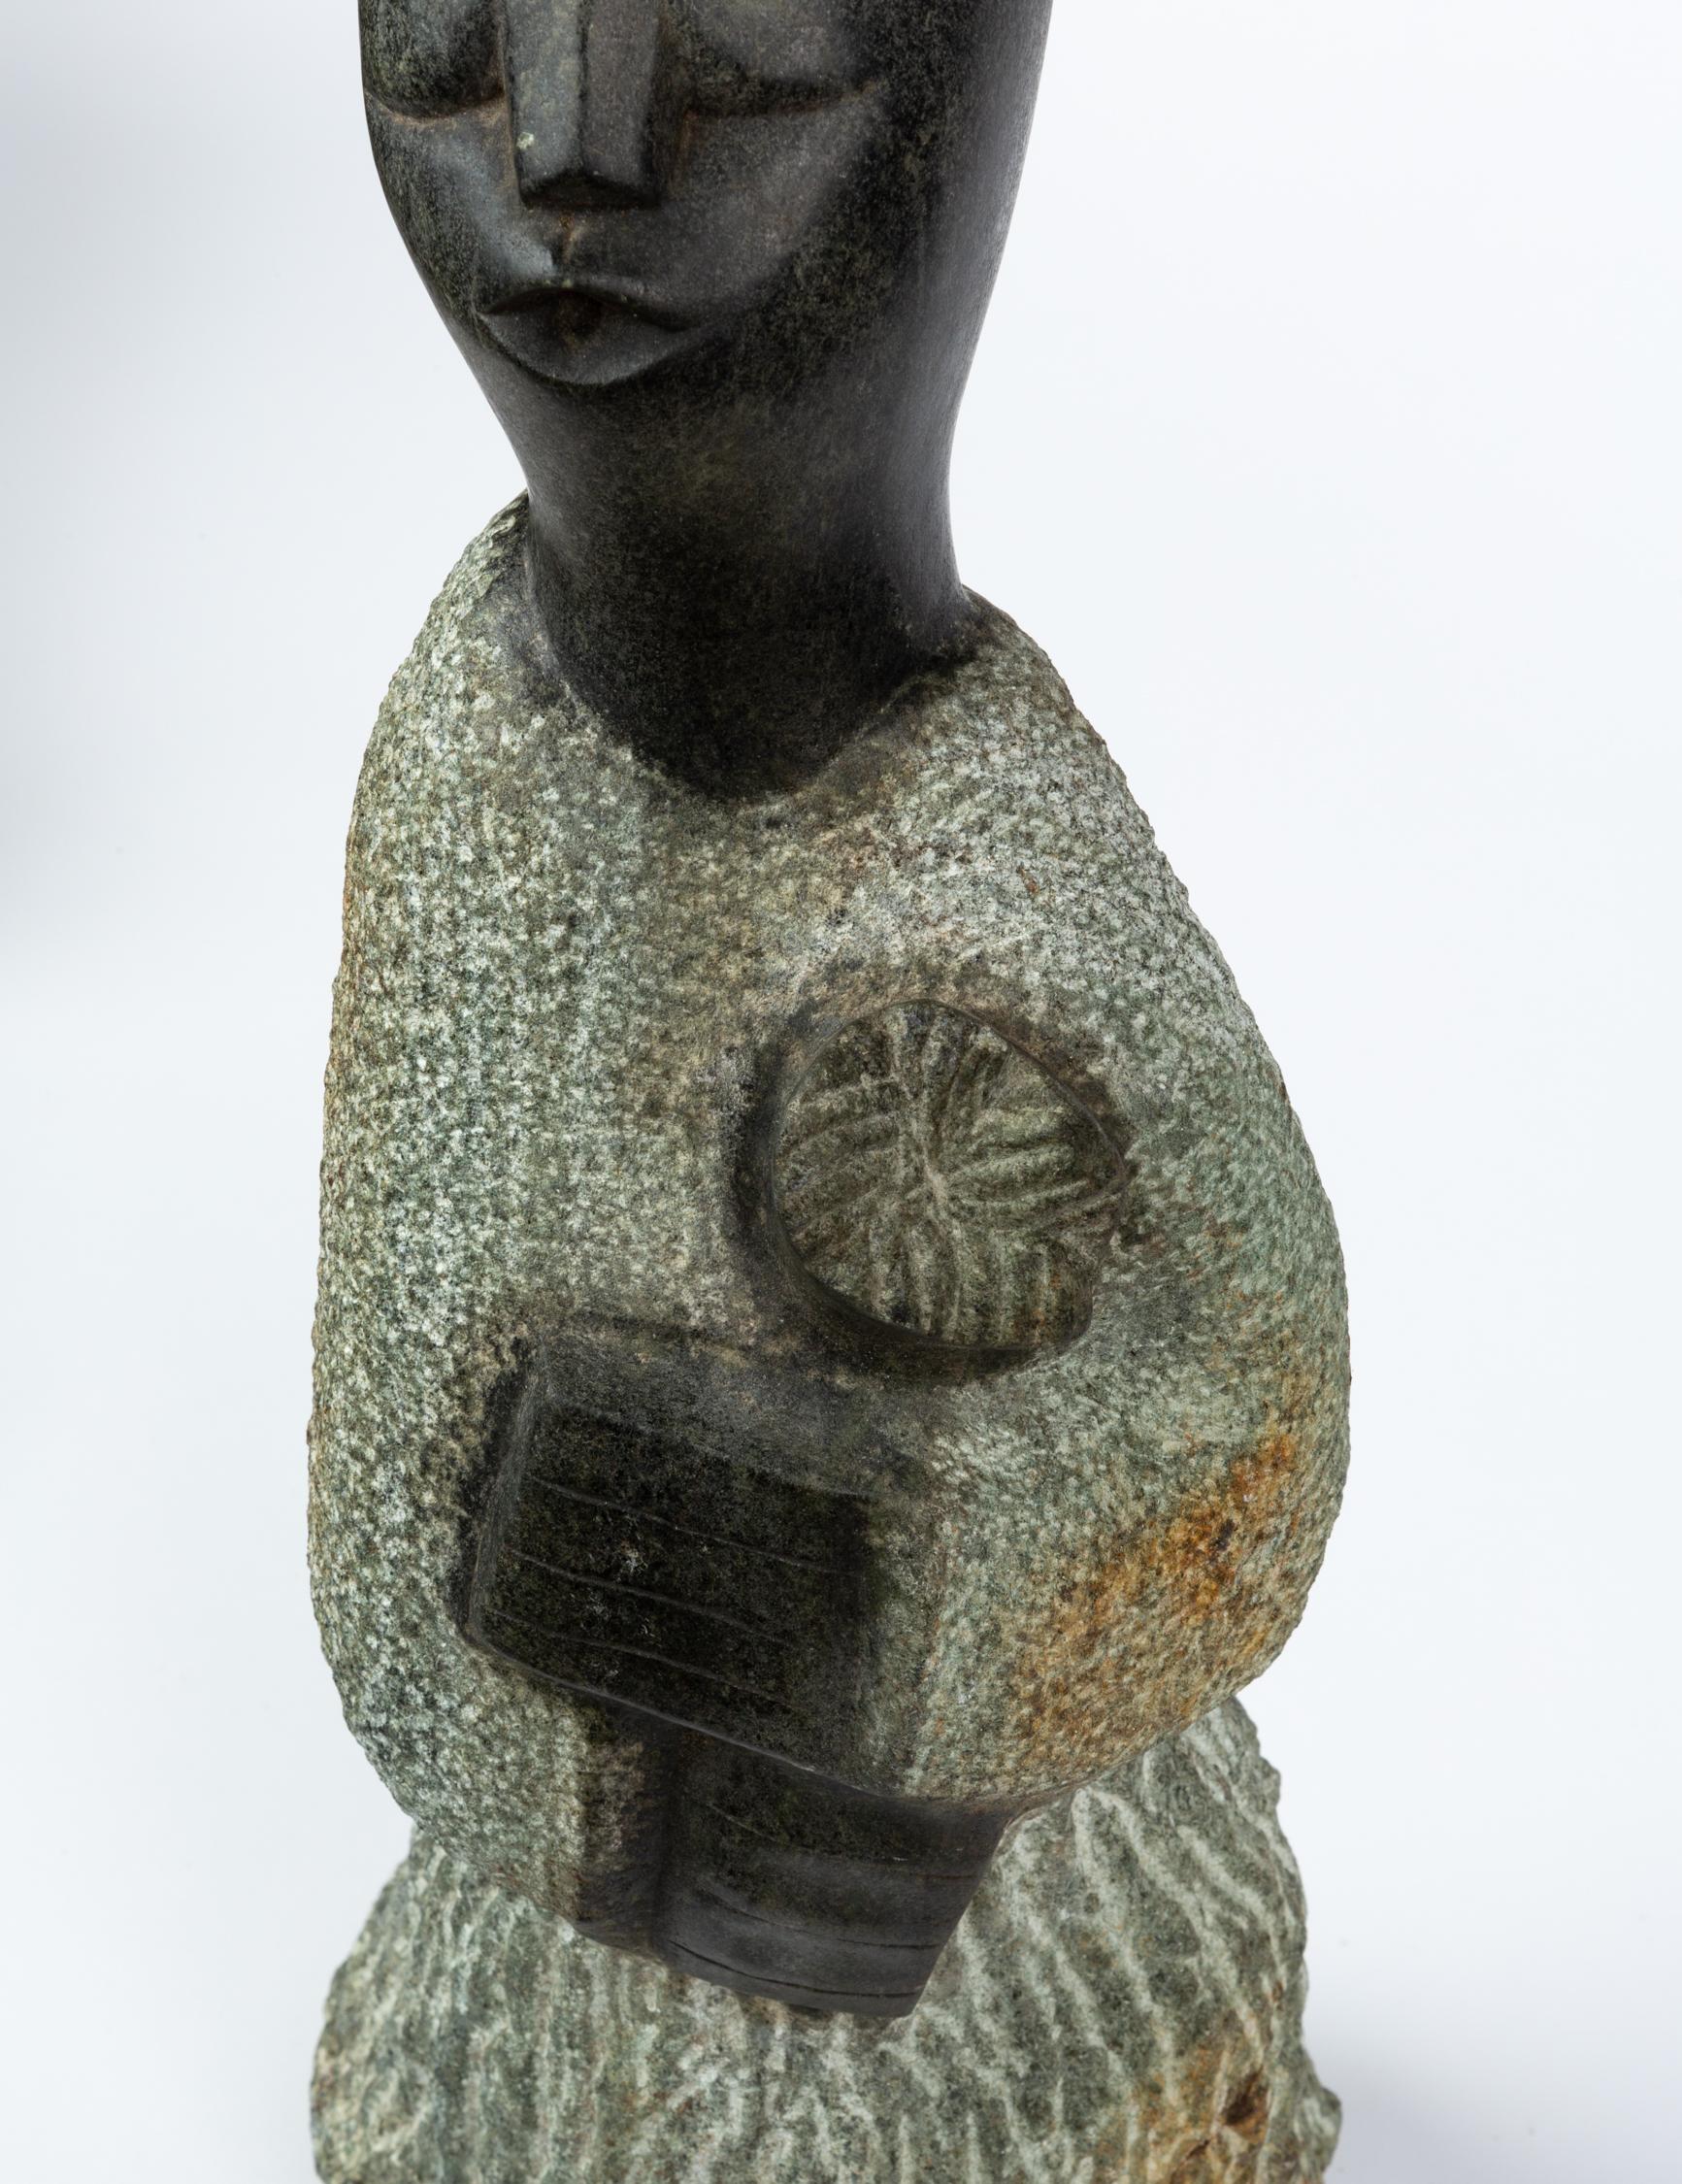 Shona Sculpture of Mother and Baby 1